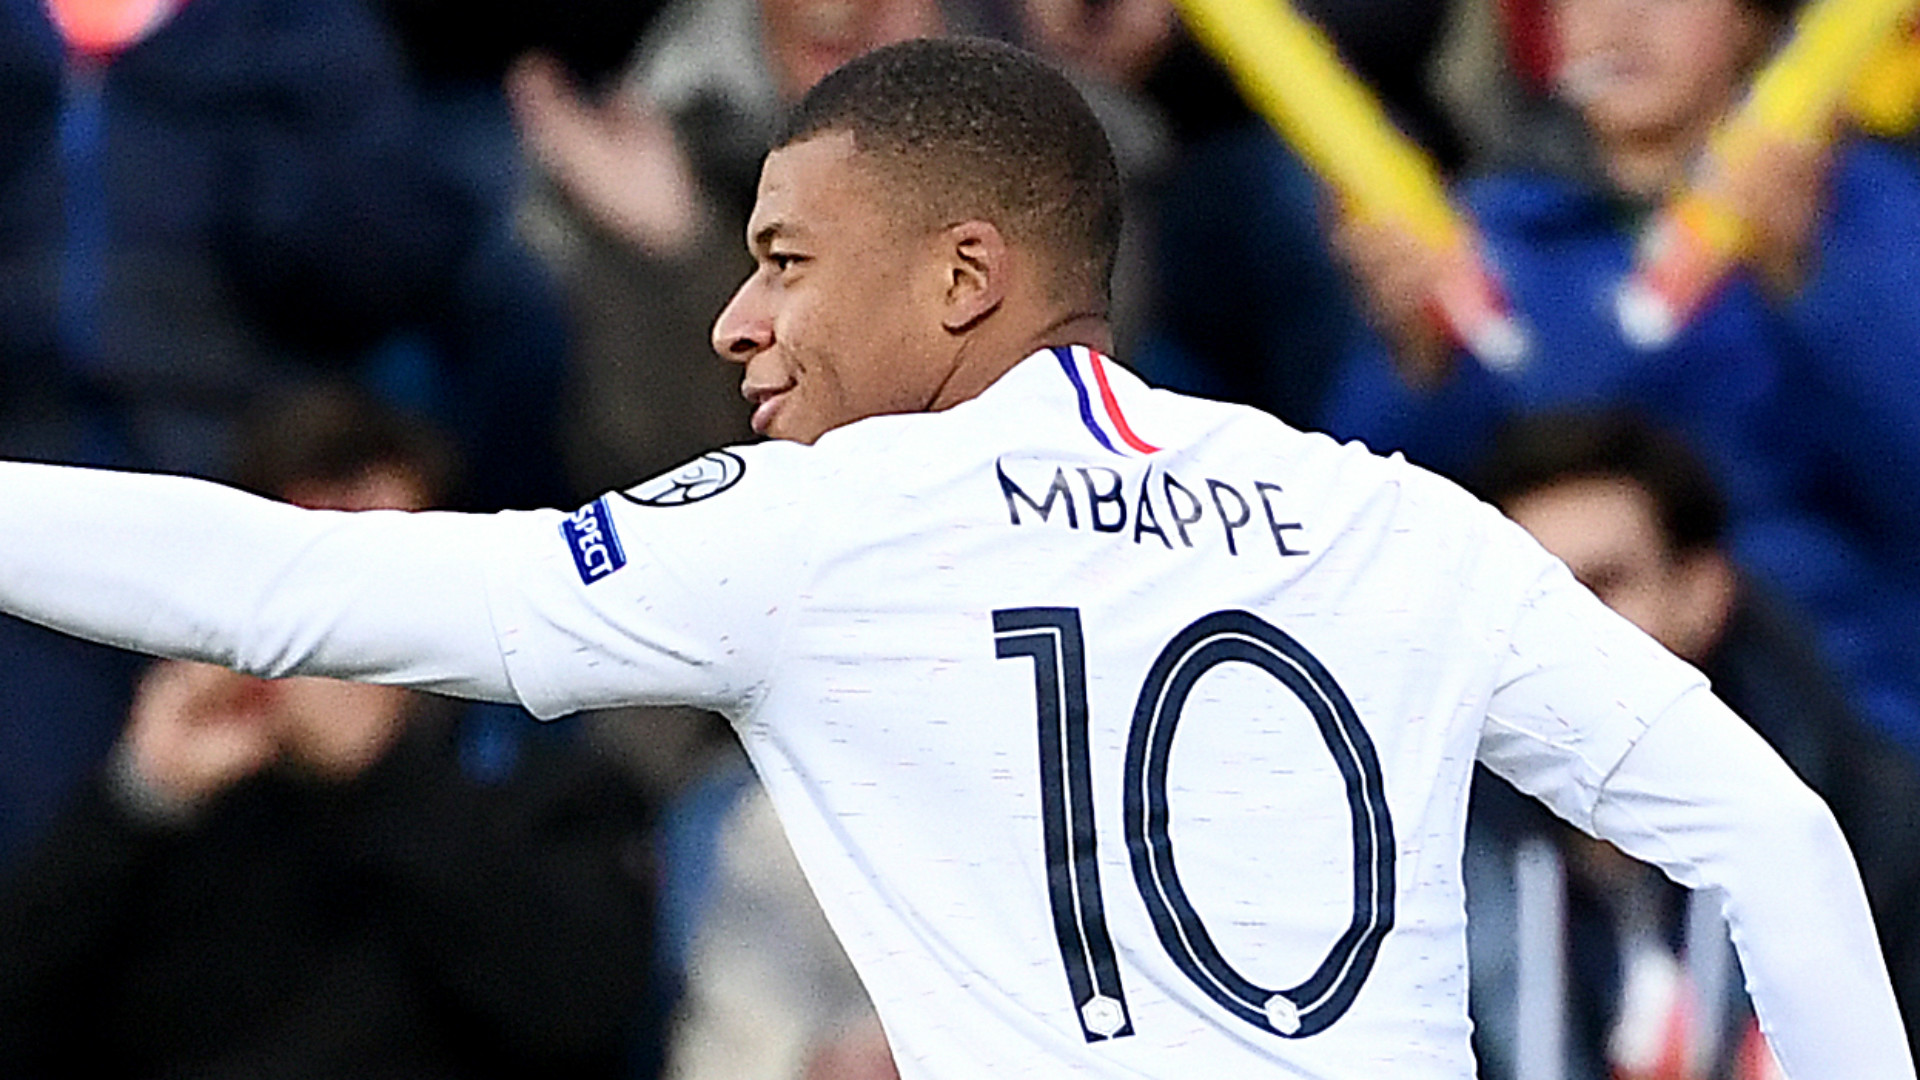 mbappe national team jersey